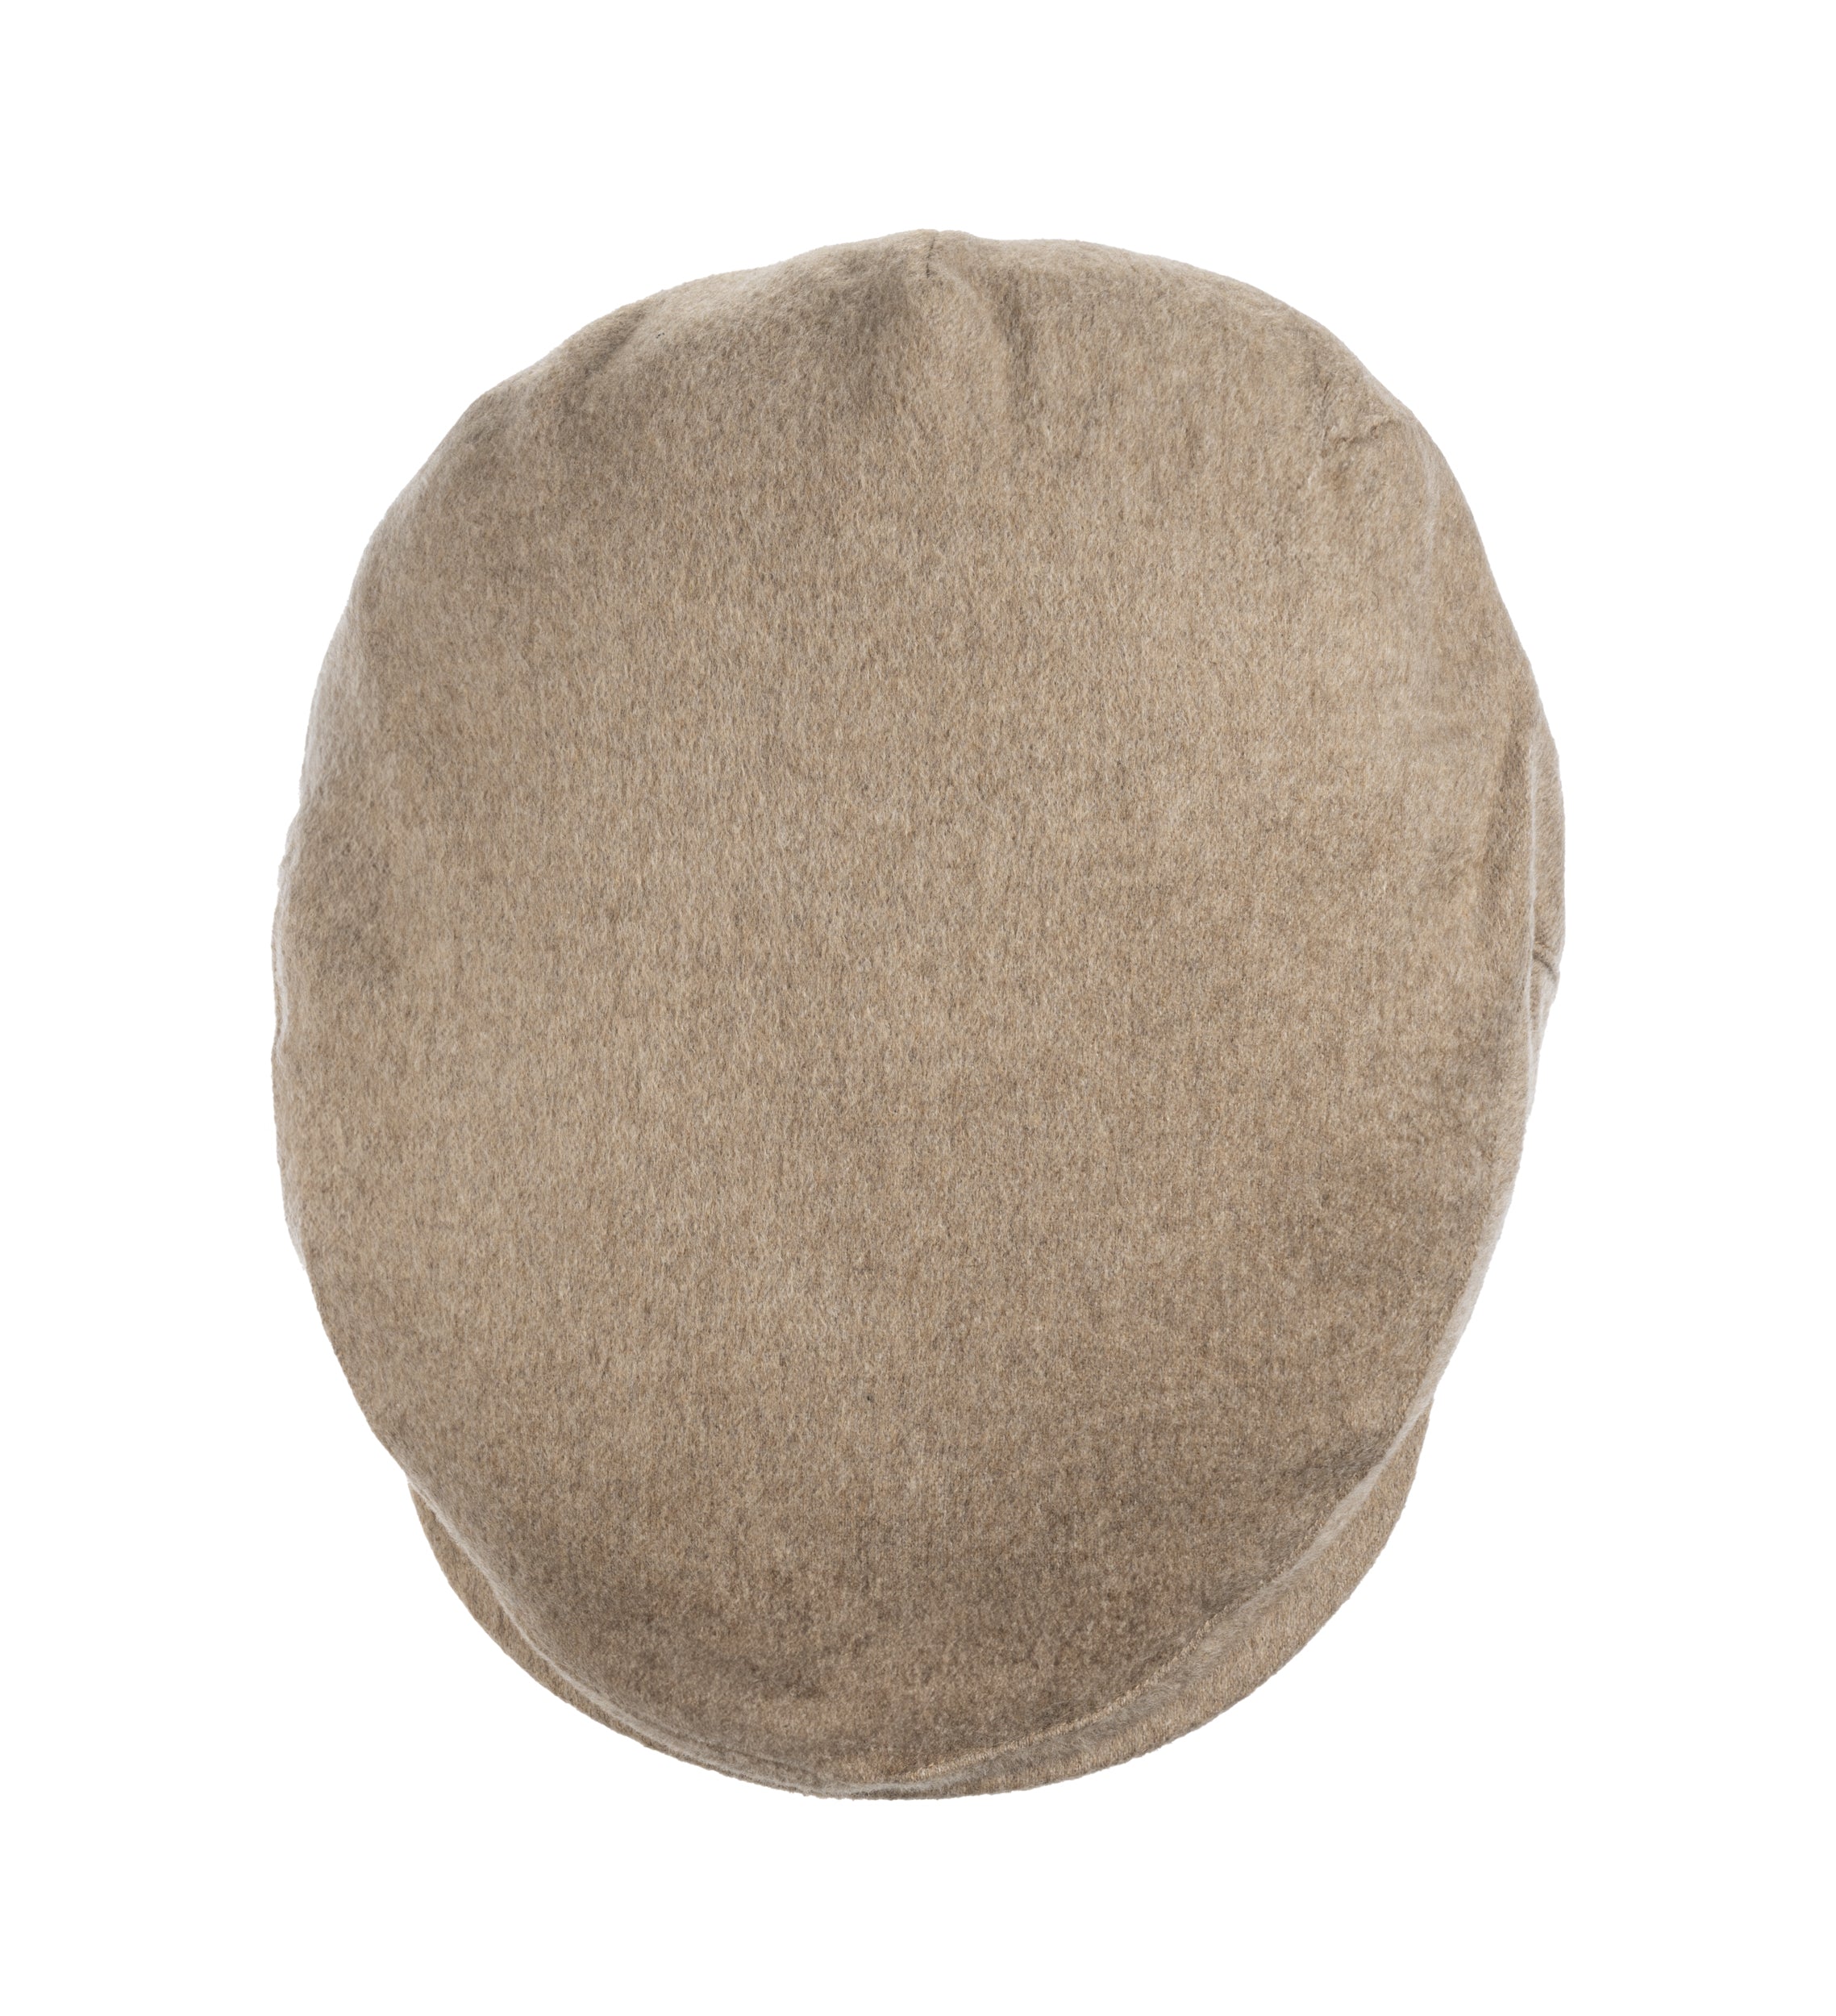 Christys' x Johnstons of Elgin Cashmere Made in England Balmoral Cap in Camel